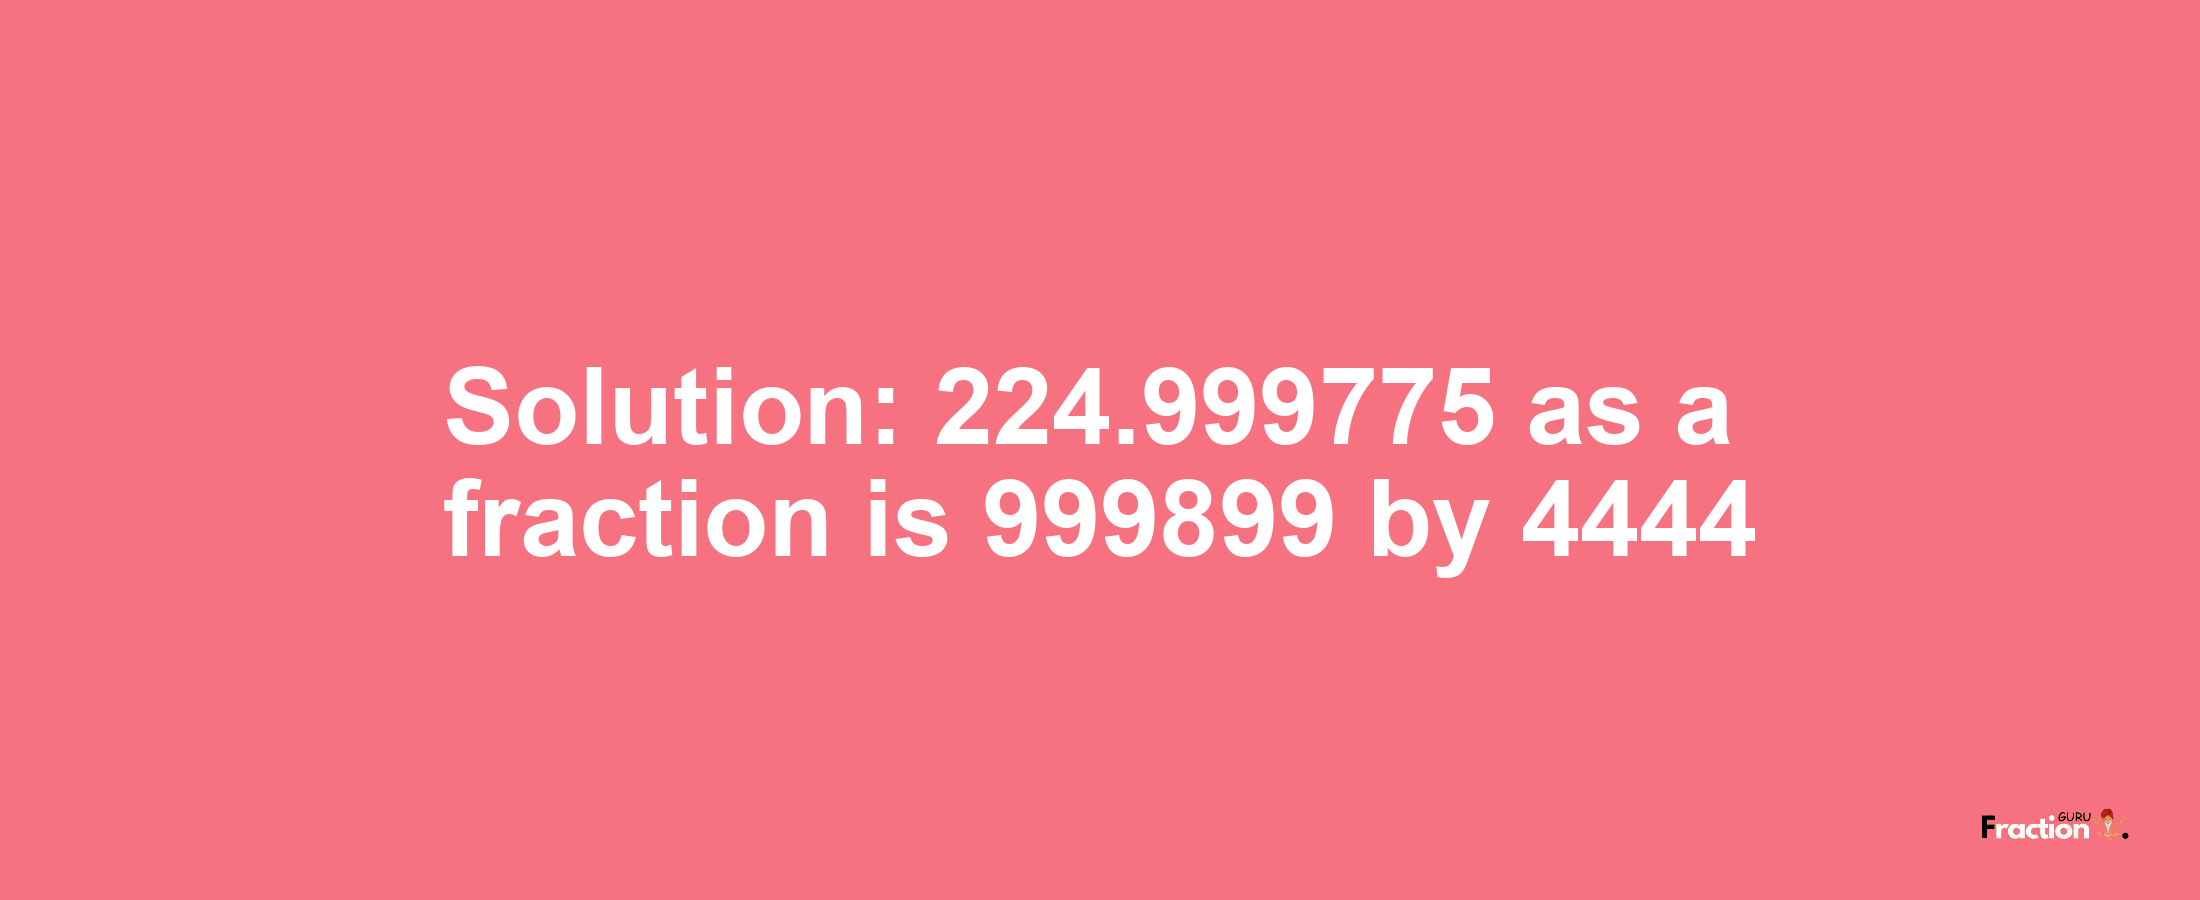 Solution:224.999775 as a fraction is 999899/4444